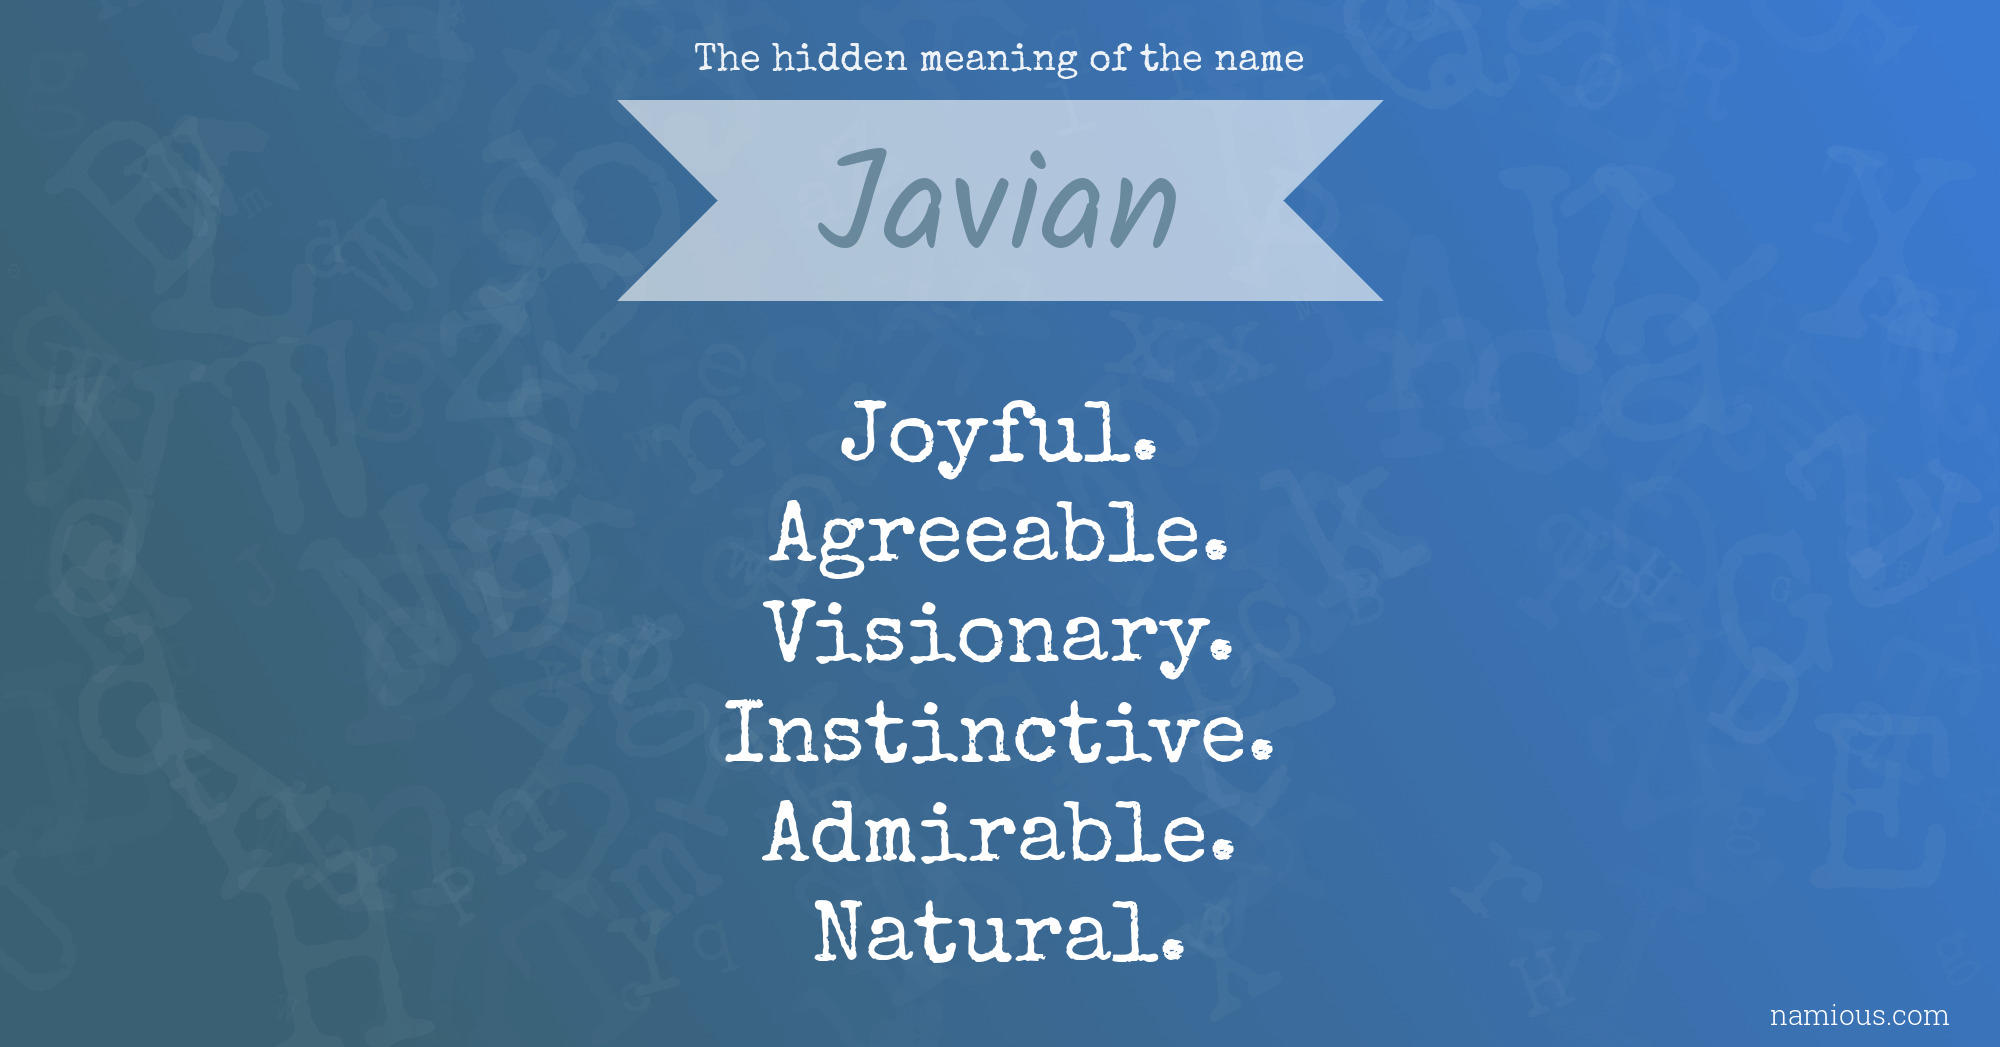 The hidden meaning of the name Javian